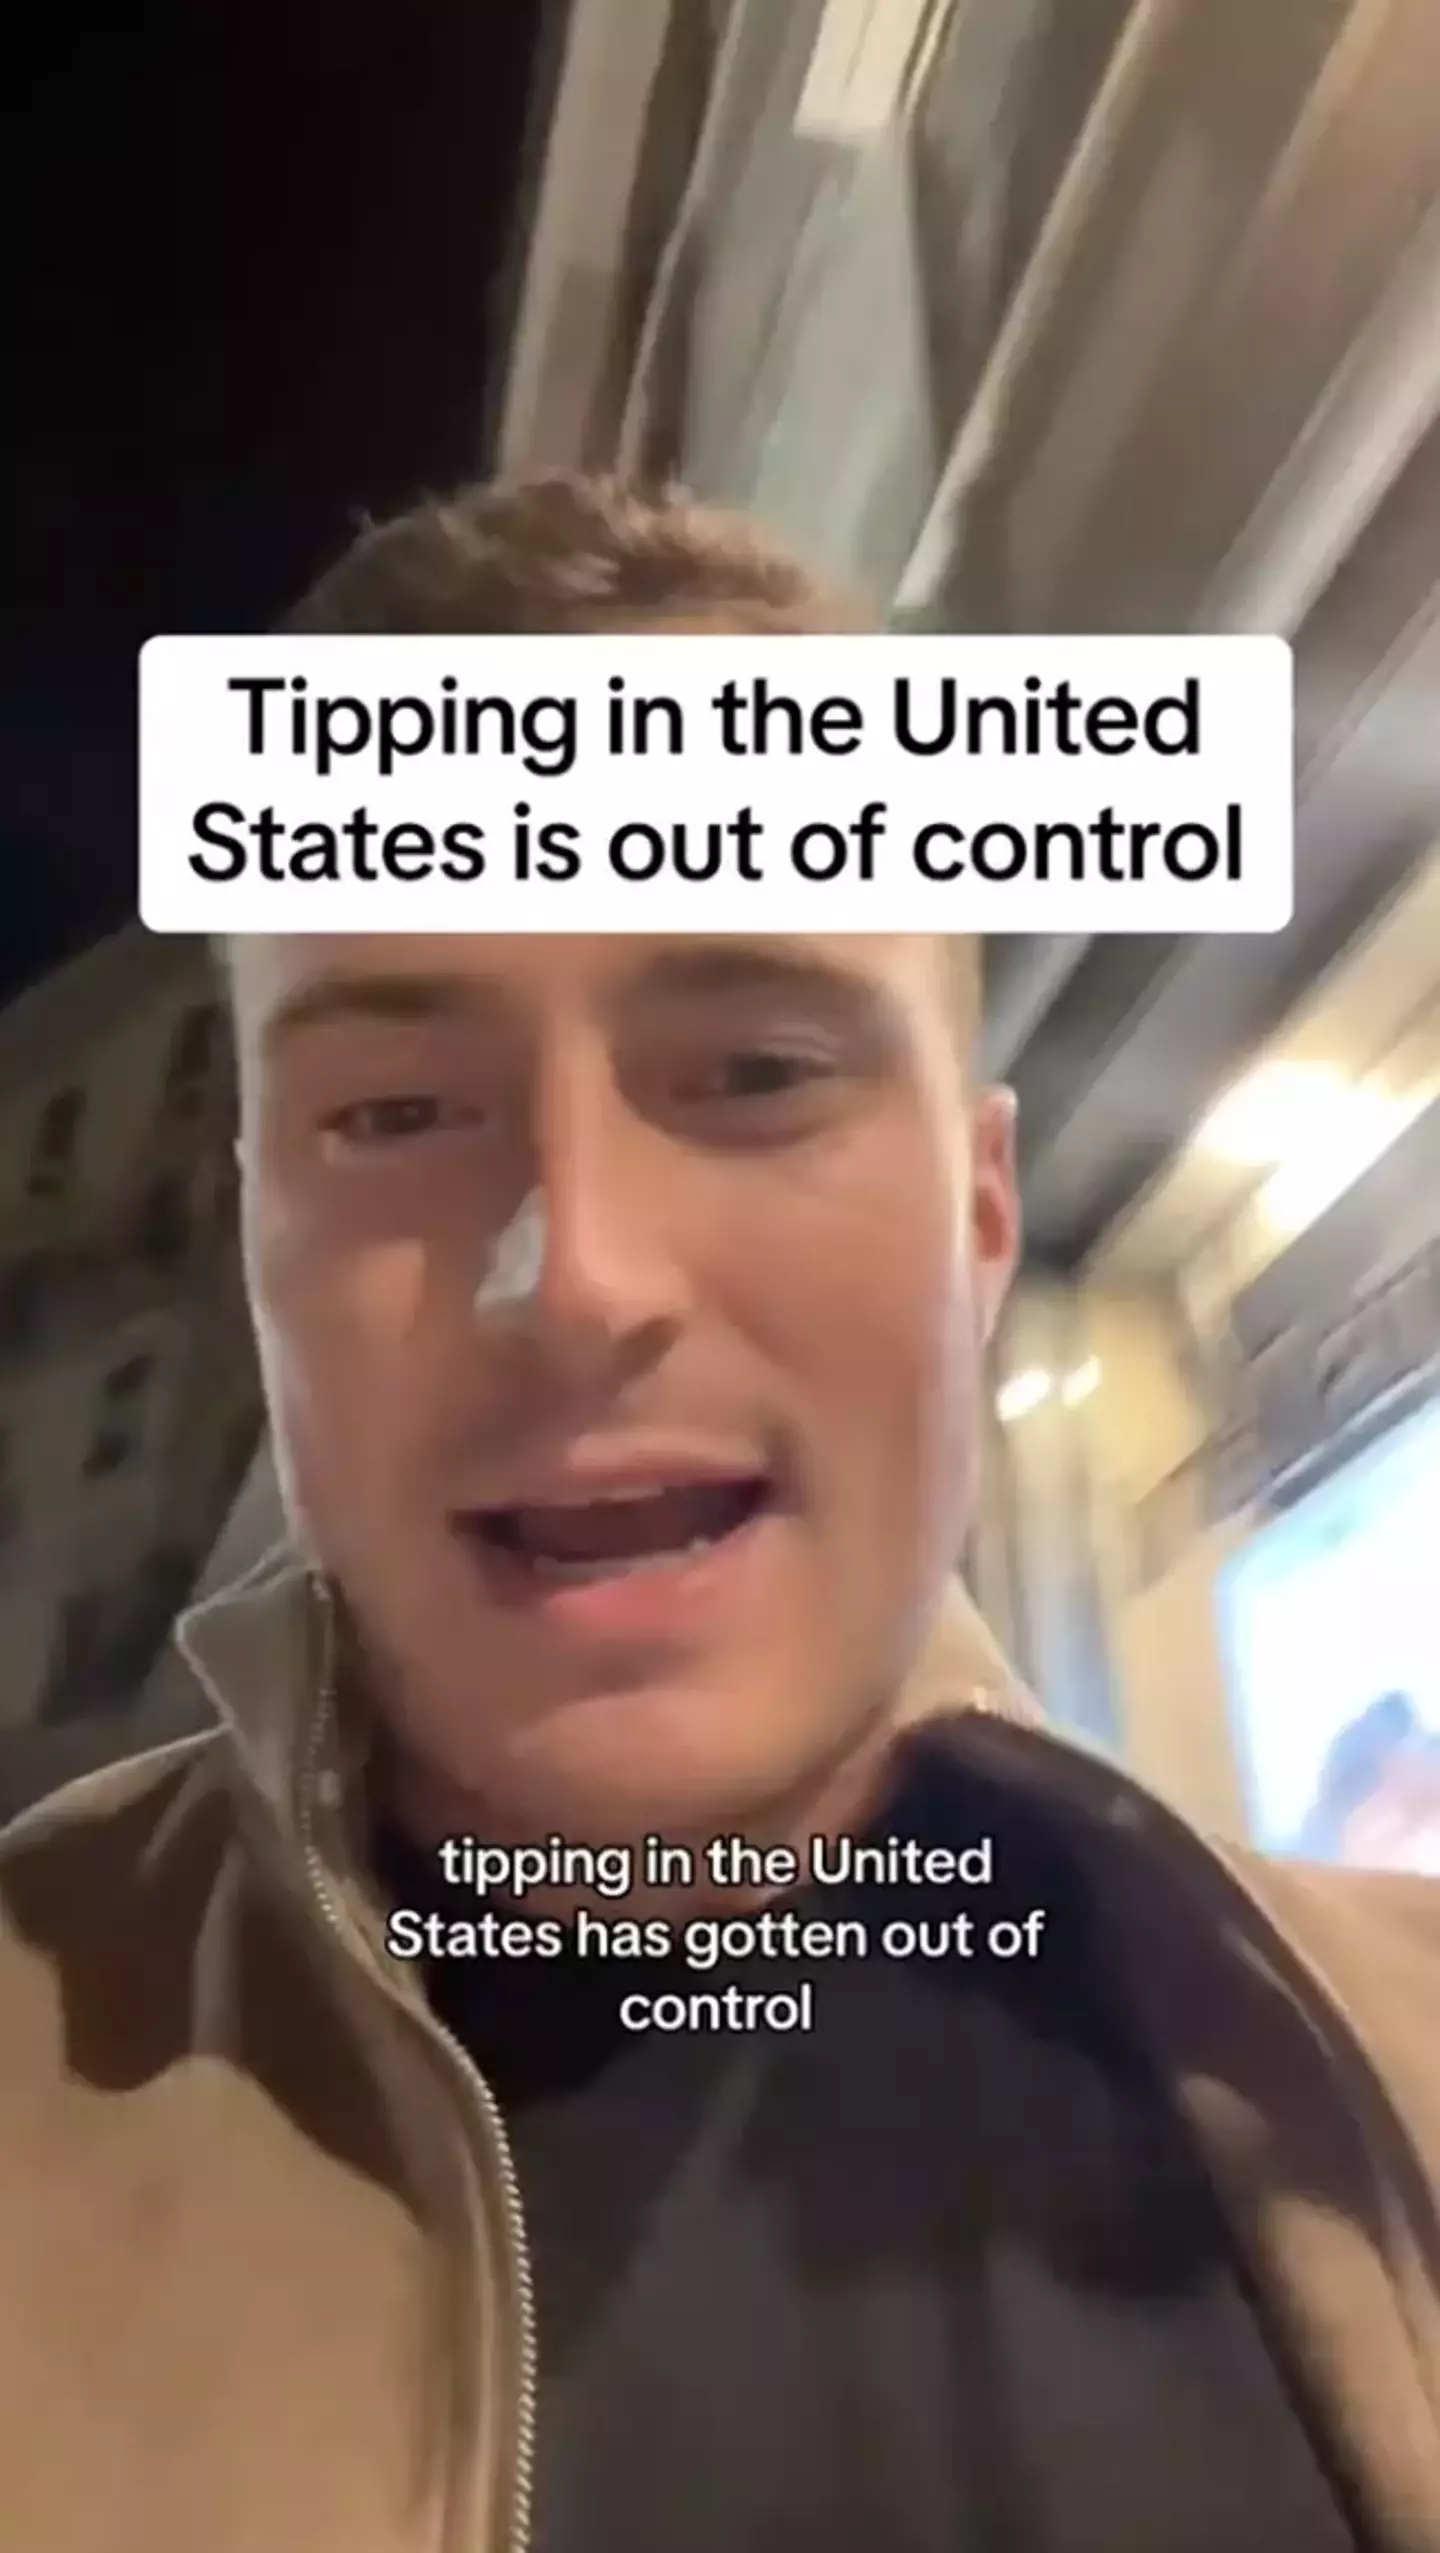 A Tiktoker went viral for calling out tipping culture in the States.